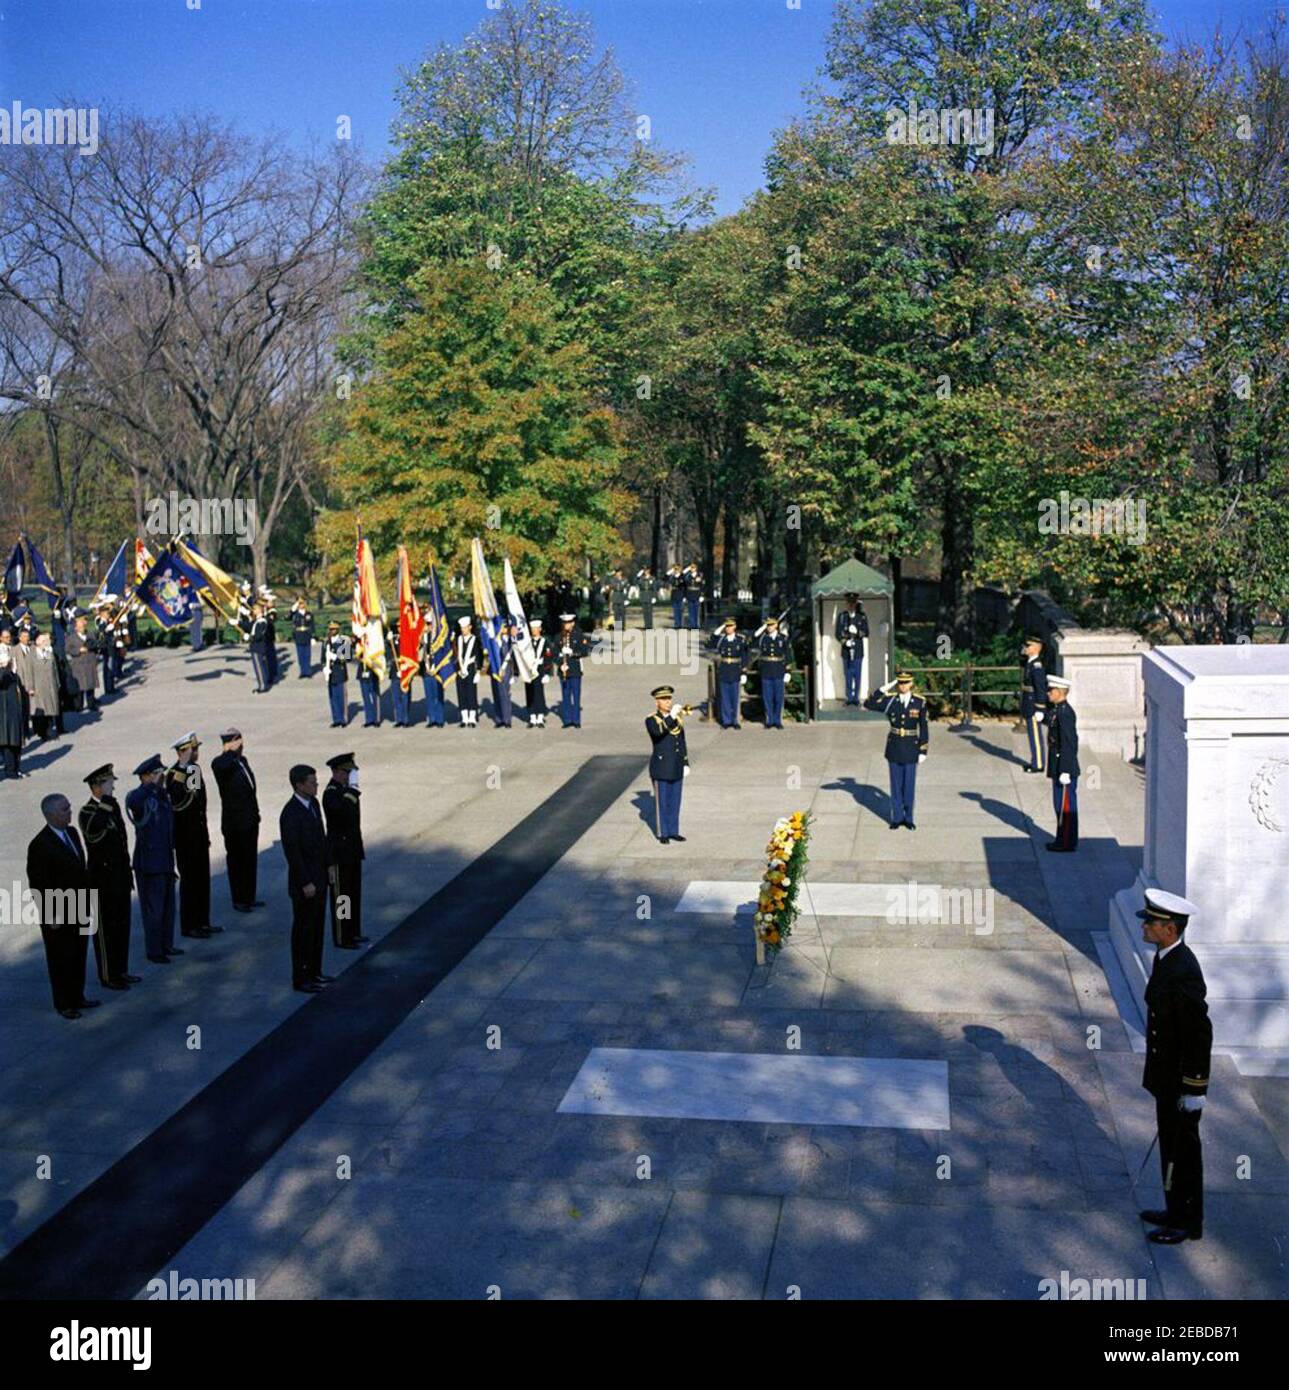 Address at Veterans Day Ceremonies, Arlington National Cemetery, 11:01AM. President John F. Kennedy attends a wreath laying ceremony at the Tomb of the Unknown Soldier as part of Veterans Day remembrances. President Kennedy stands with Major General Paul A. Gavan, Commanding General of the Military District of Washington. Standing behind the President (L-R): John S. Gleason, Administrator of Veterans Affairs; Military Aide to the President General Chester V. Clifton; Air Force Aide to the President Colonel Godfrey T. McHugh; Naval Aide to the President Captain Tazewell T. Shepard; and Thomas S Stock Photo